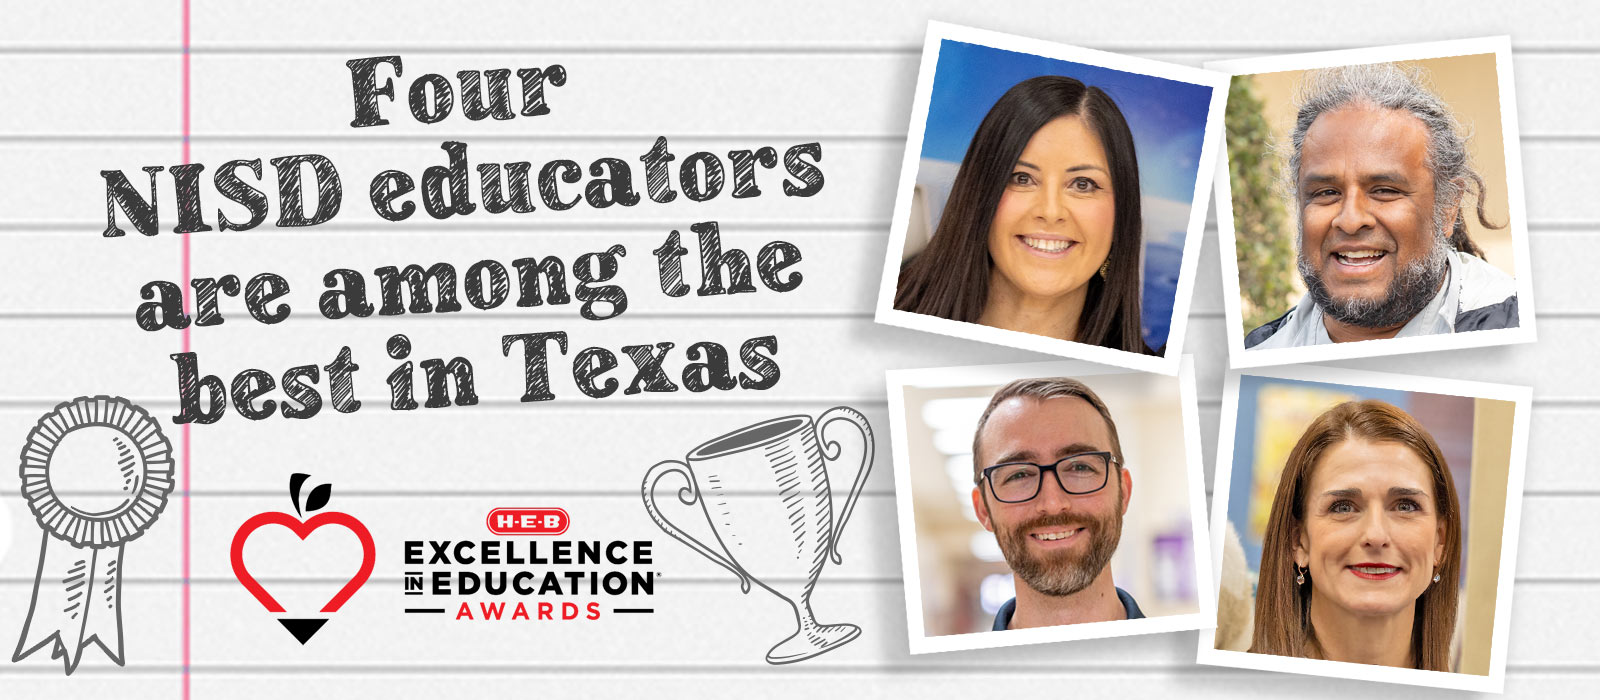 Four Team 51 Educators are among the Best in Texas